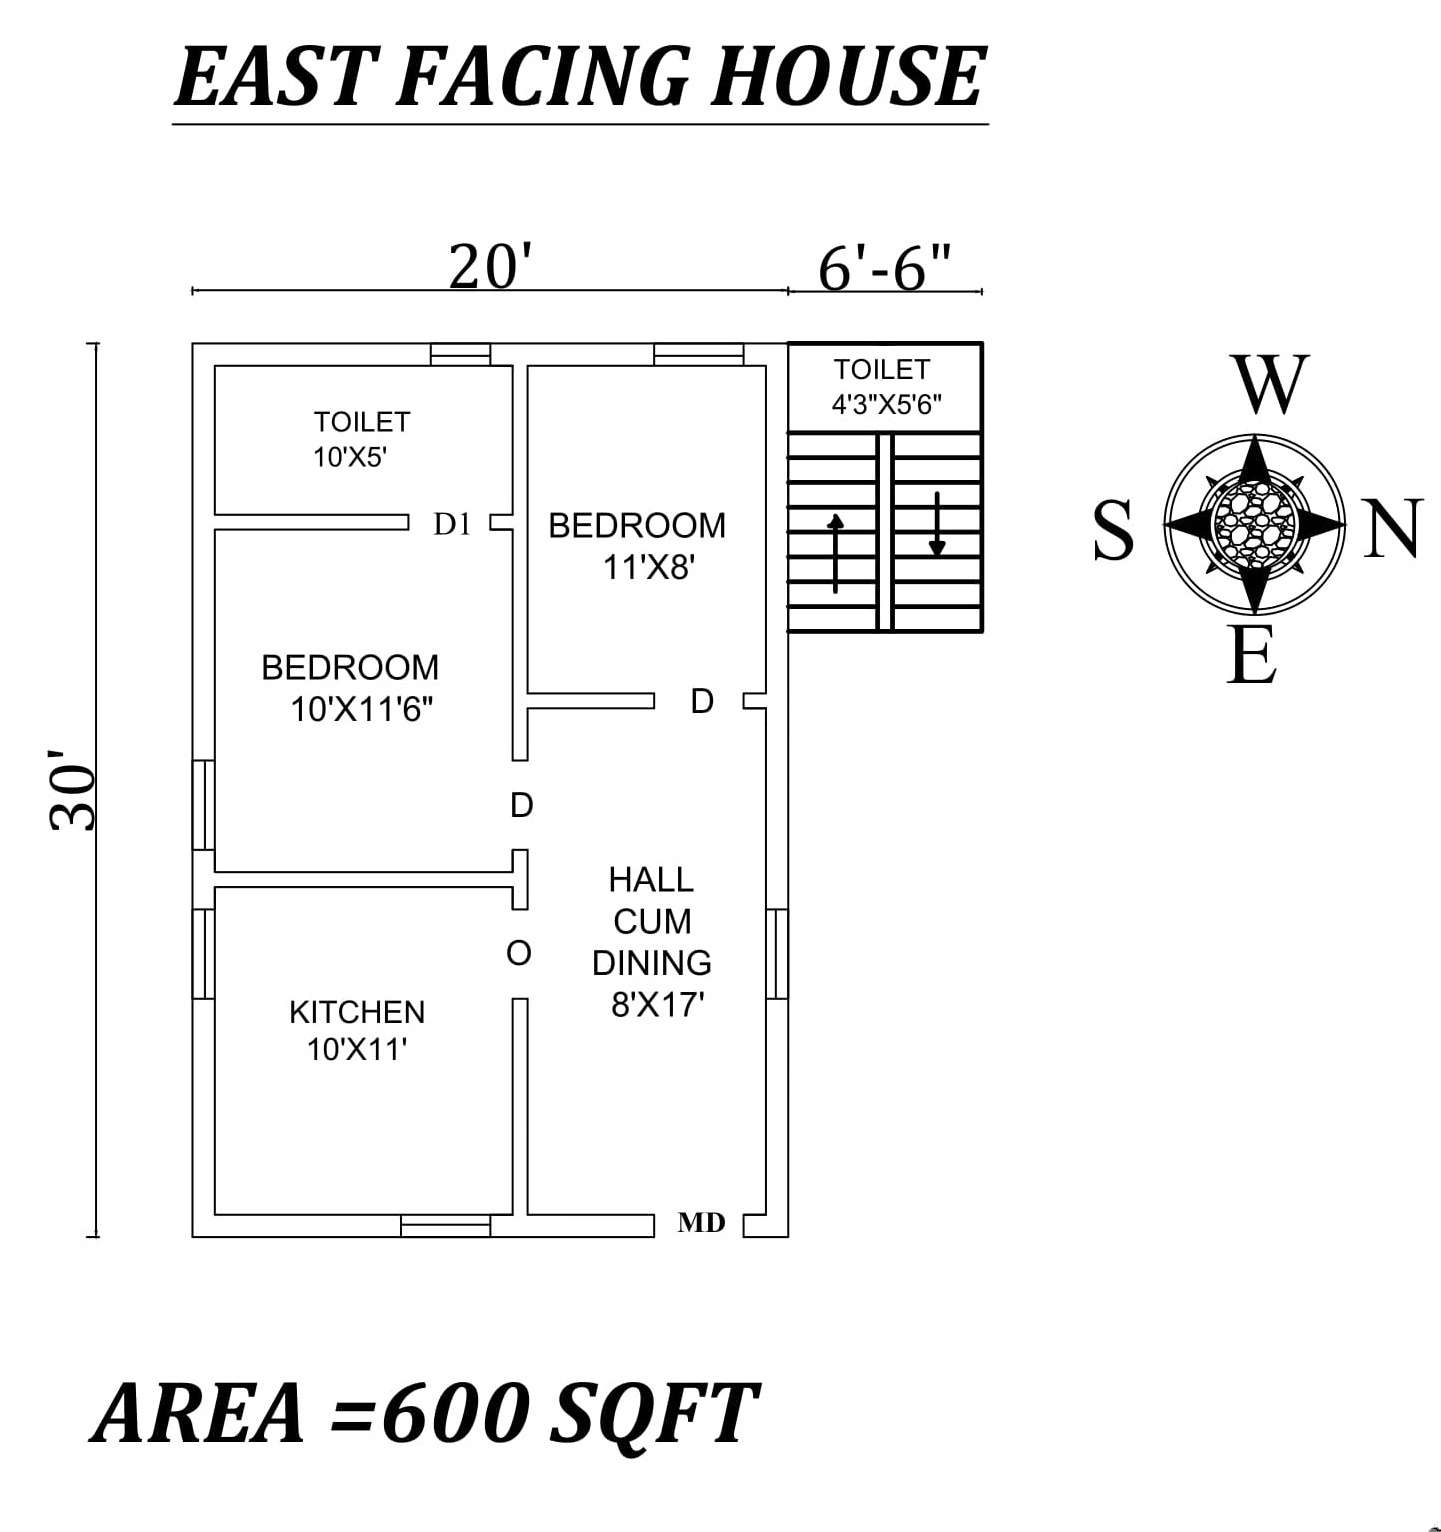 Autocad Drawing File Shows X Bhk East Facing House Plan As Per My Xxx